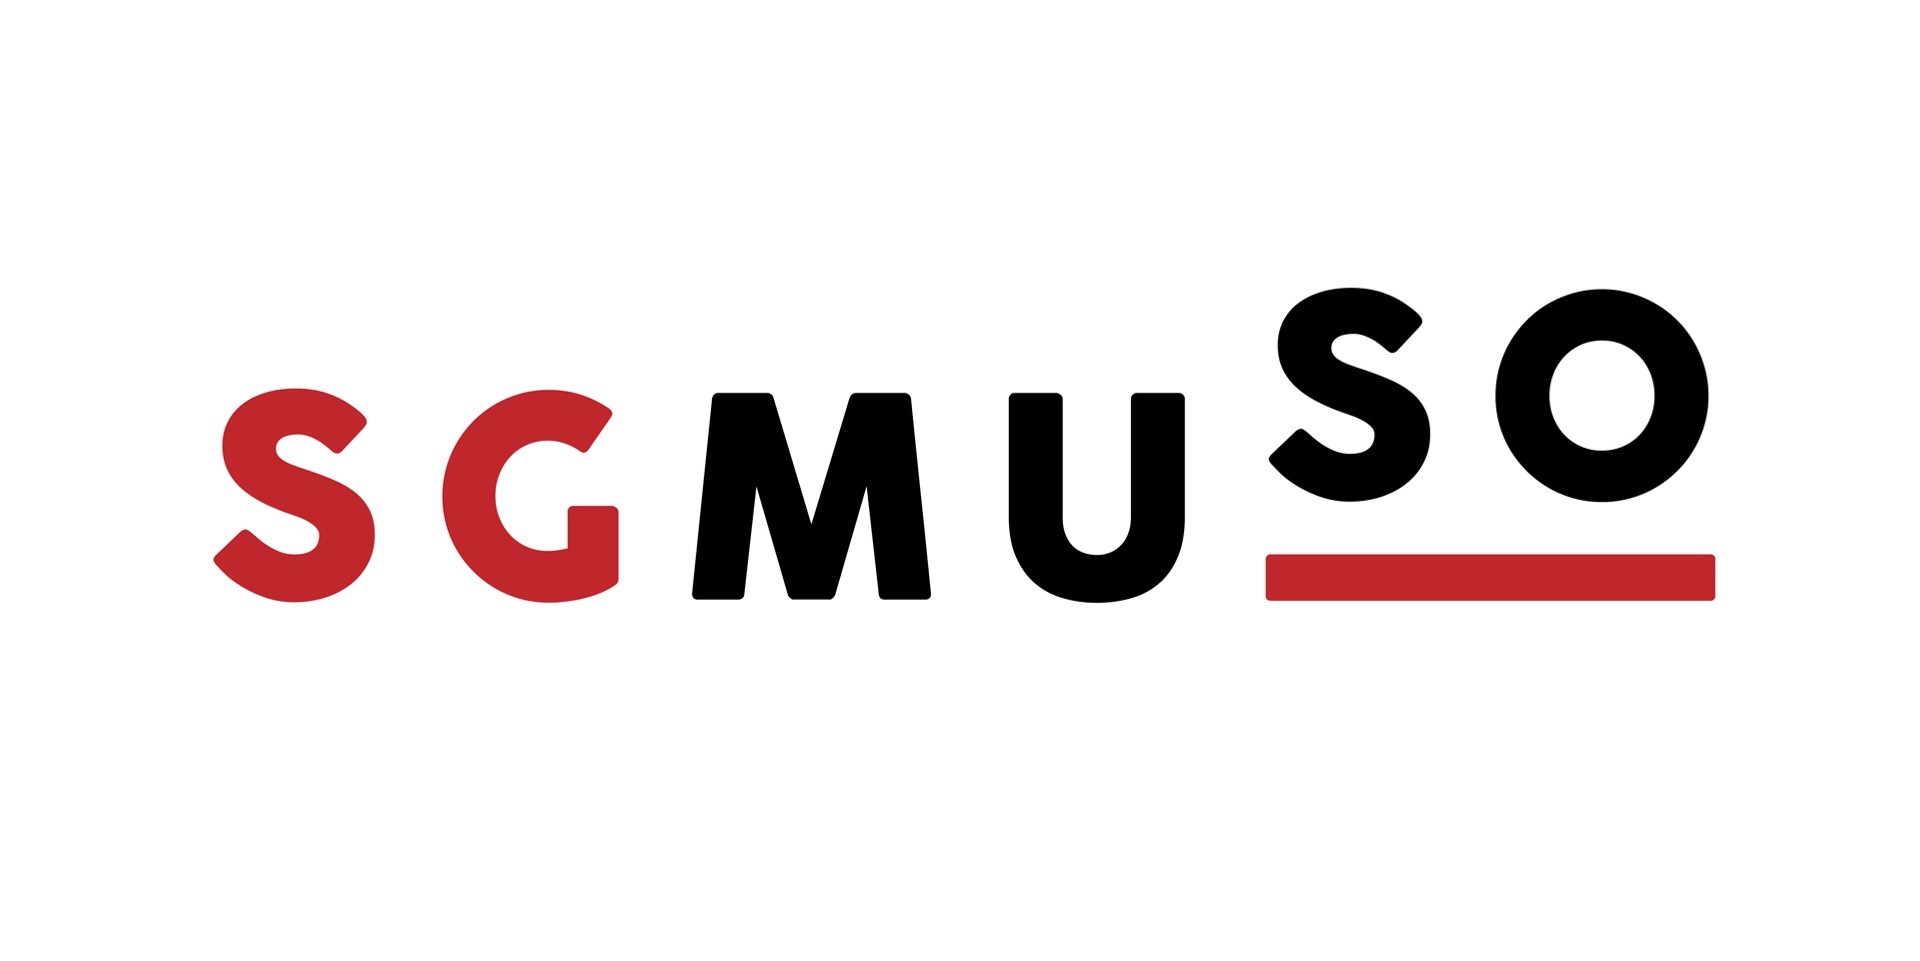 SGMUSO launches membership scheme, details plans and initiatives for future